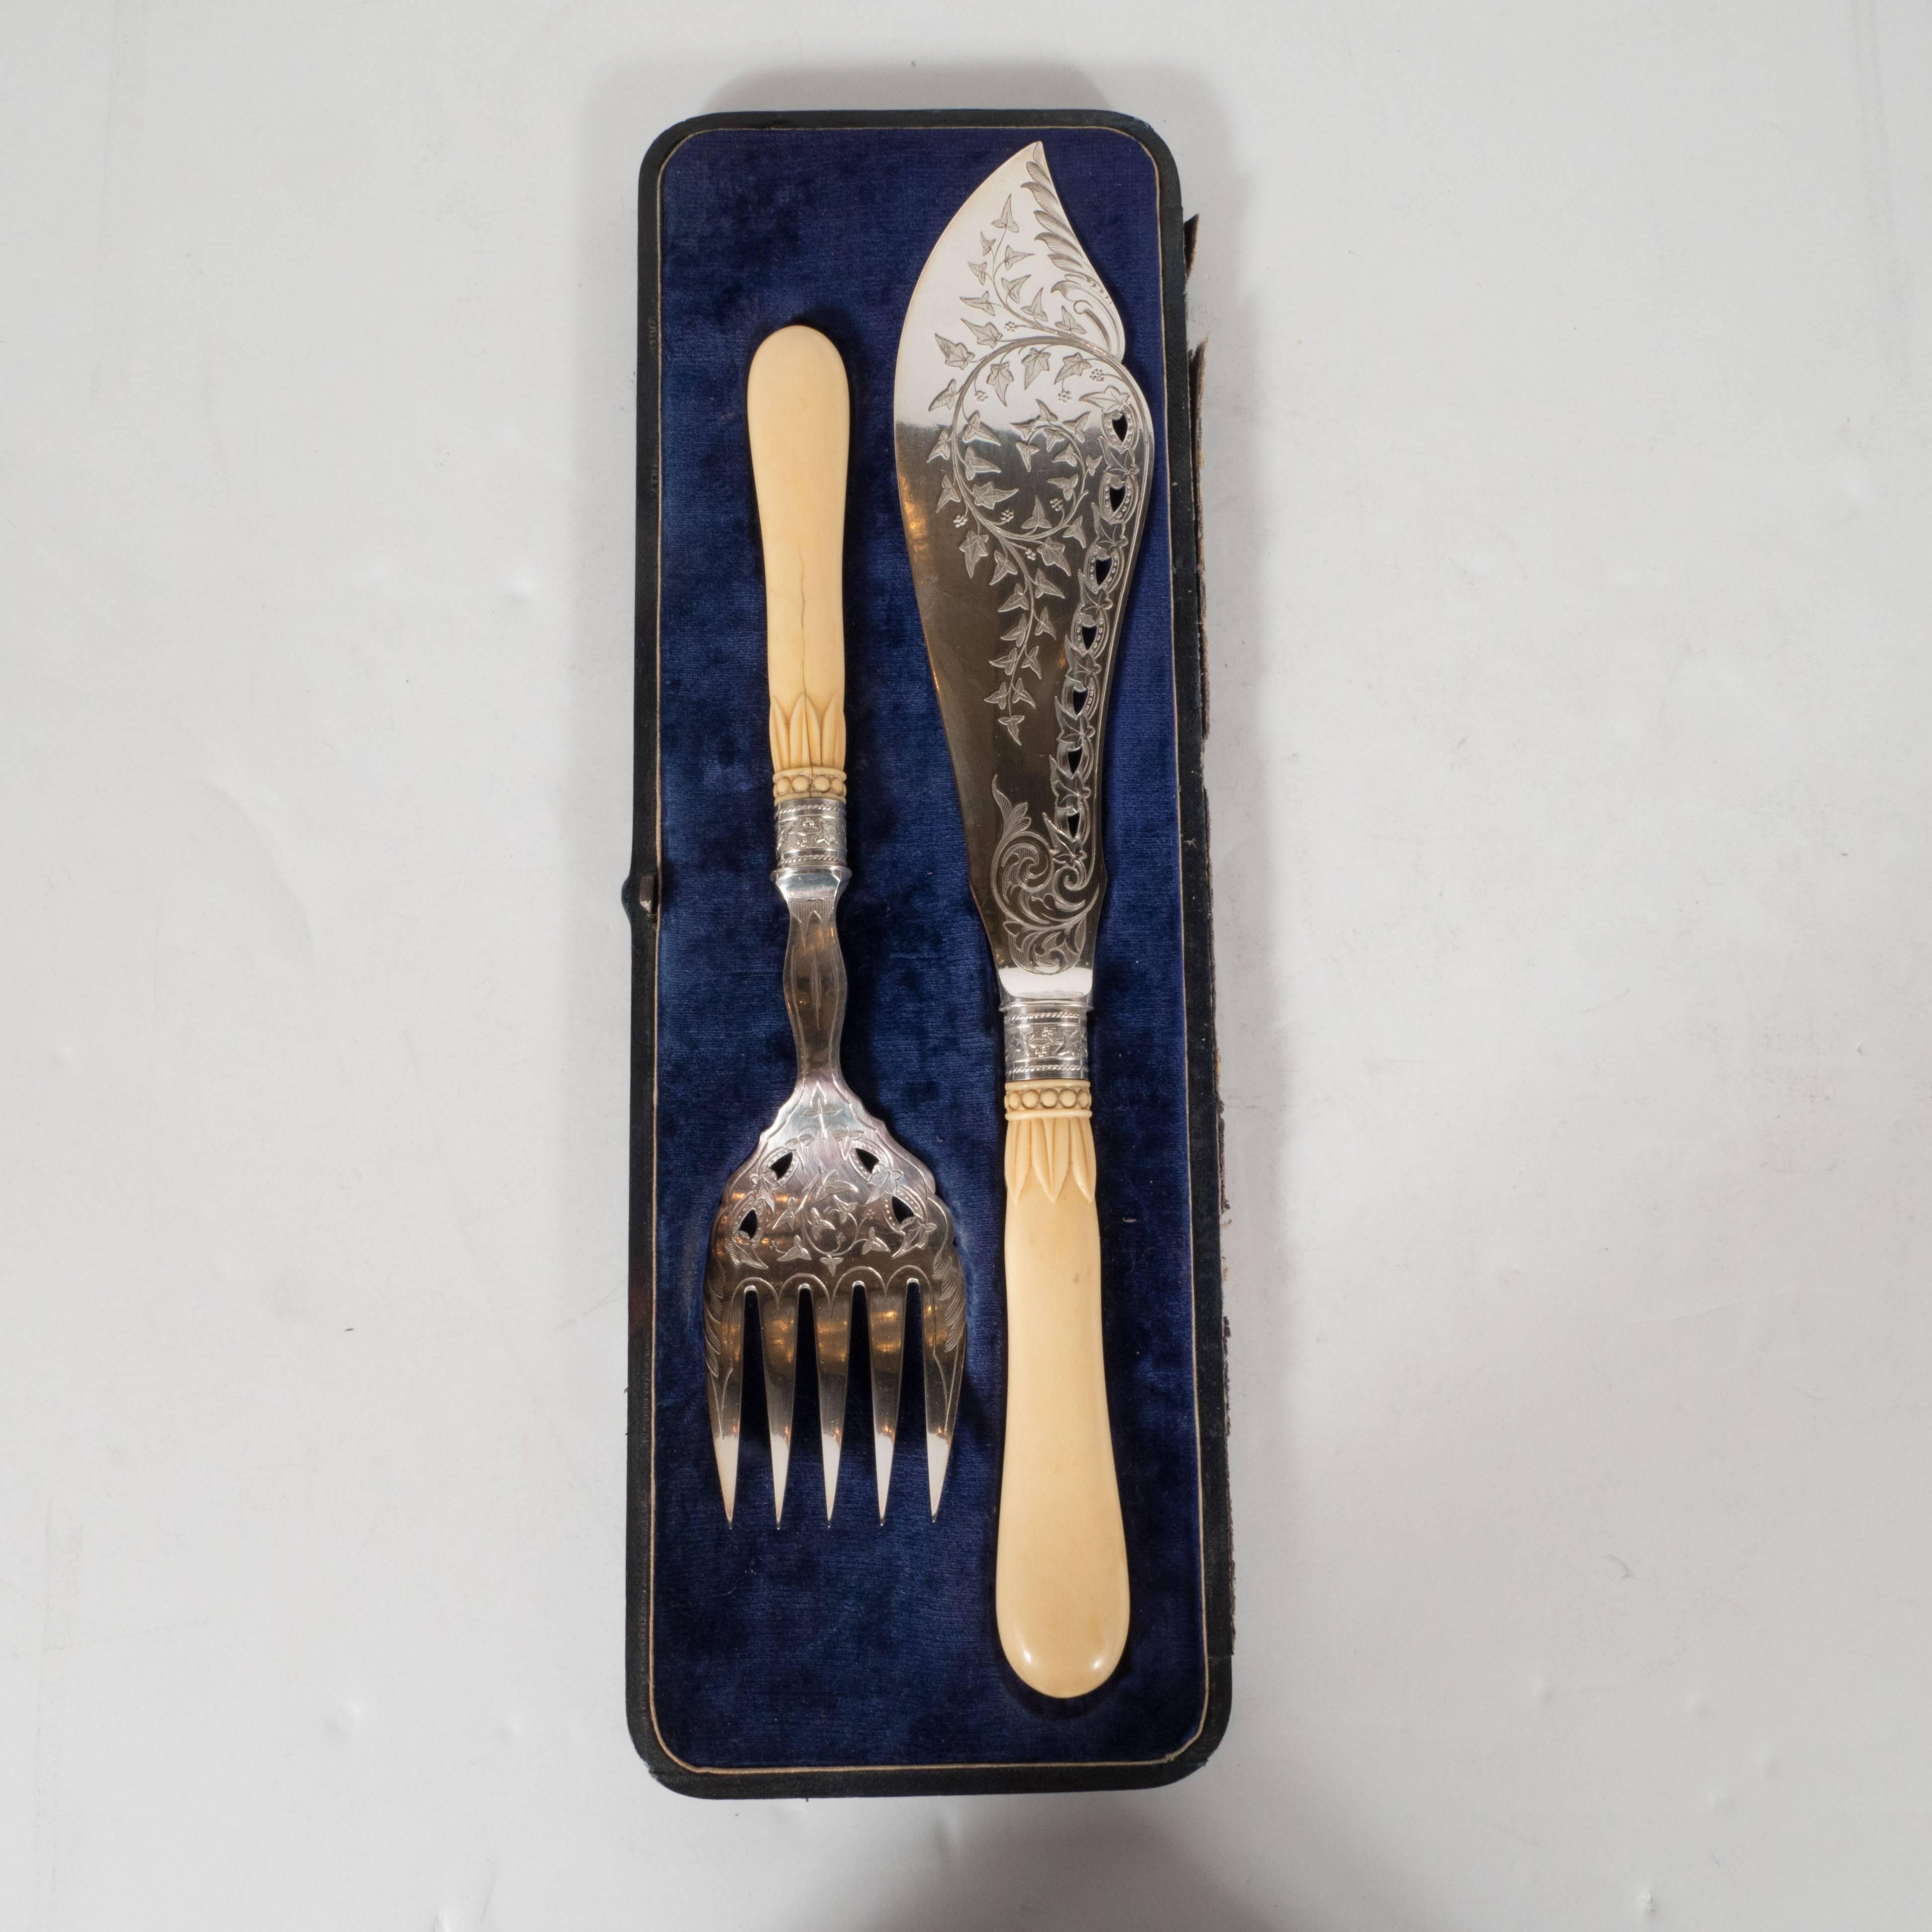 This exquisite Victorian fish set features a serving fork and knife with incredibly detailed engravings throughout. There are elaborate foliate patterns, resembling an ivy motif, as well as Baroque scrolling designs throughout. Additionally, each